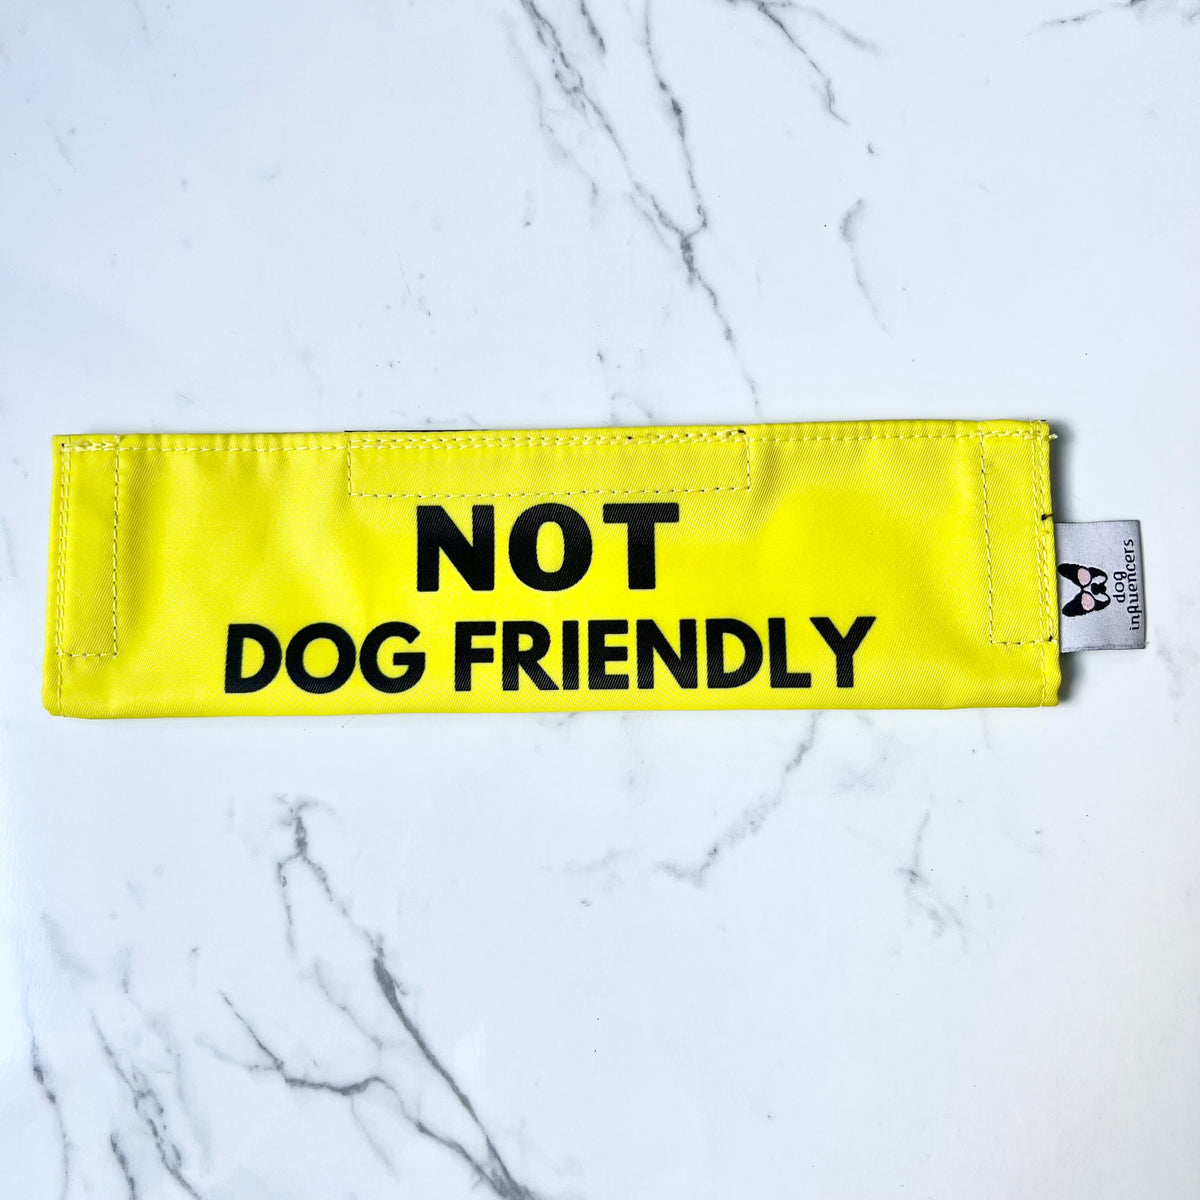 Lead Sleeve for Reactive, Anxious, Nervous Dogs - Puppy and Dog in Training Leash Sleeve